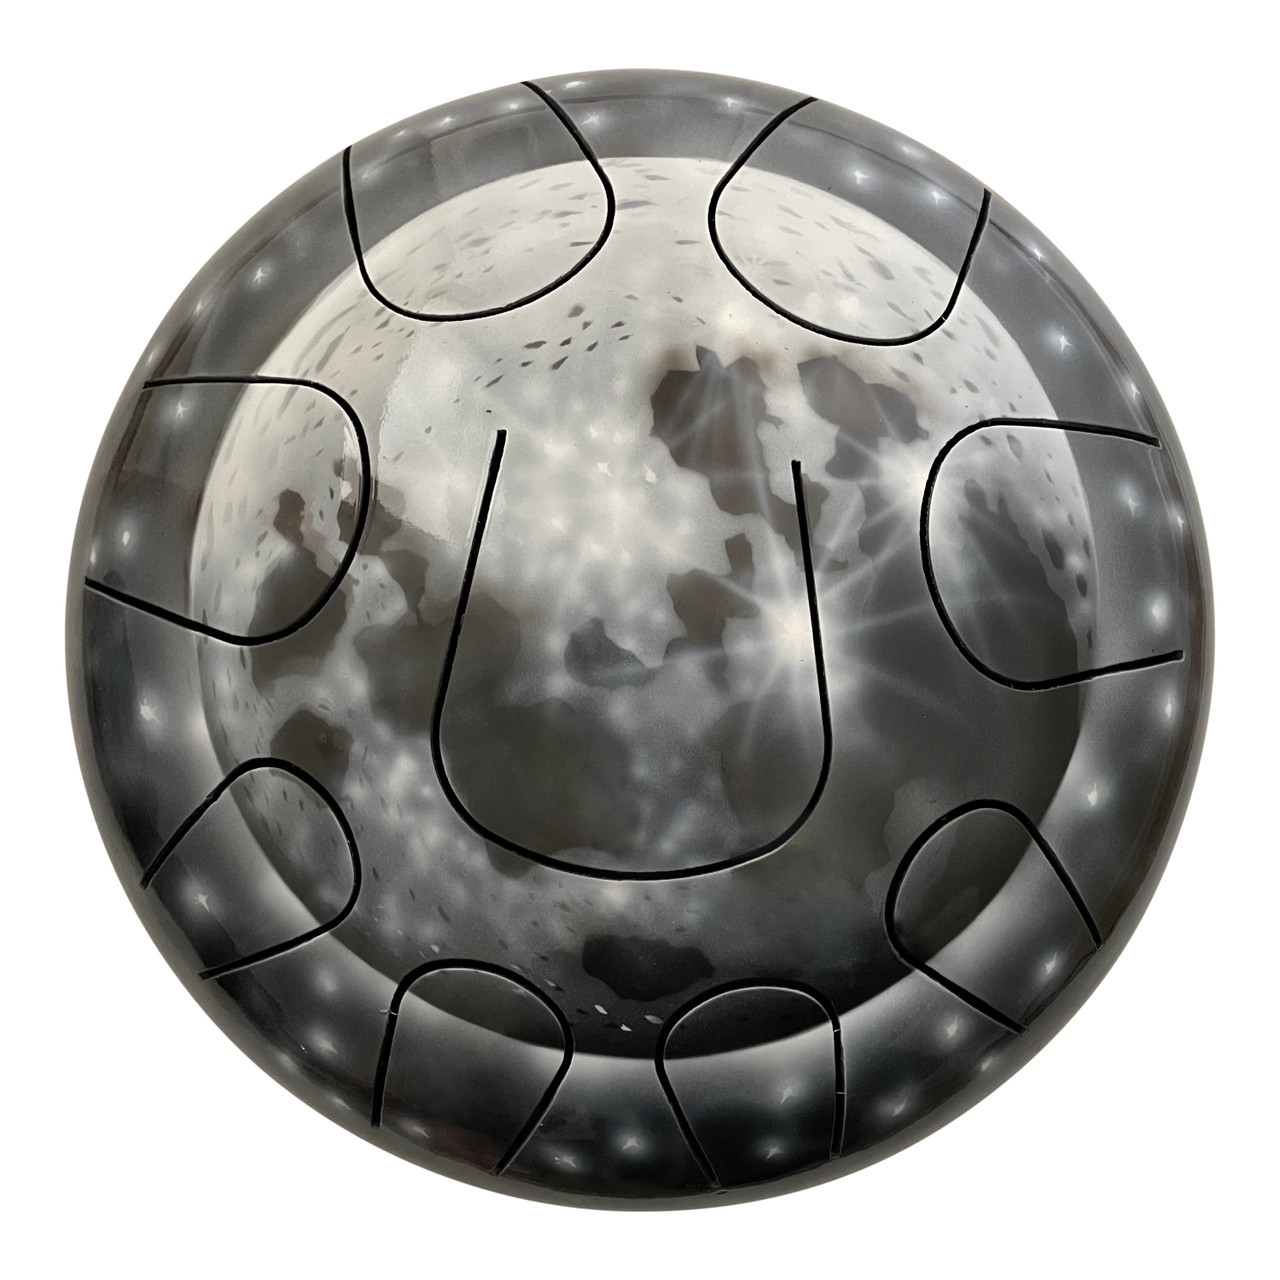 Steel tongue drum Zenko - Learn to play with our free tutorials